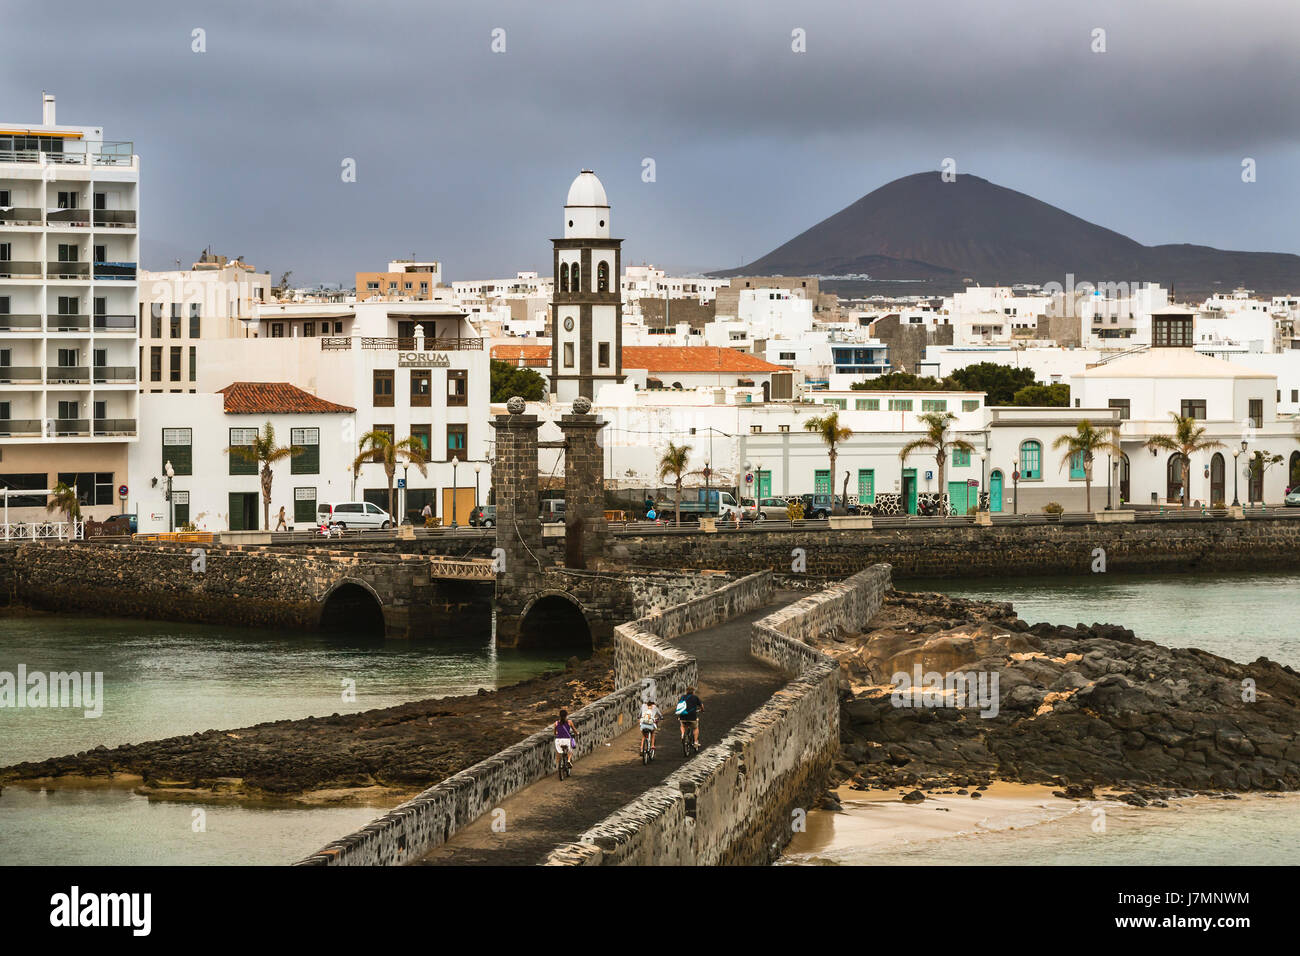 LANZAROTE - JANUARY 5: View from the Castillo de St. Gabriel to Arrecife in Lanzarote, Spain with dark clouds on January 5, 2016. Stock Photo